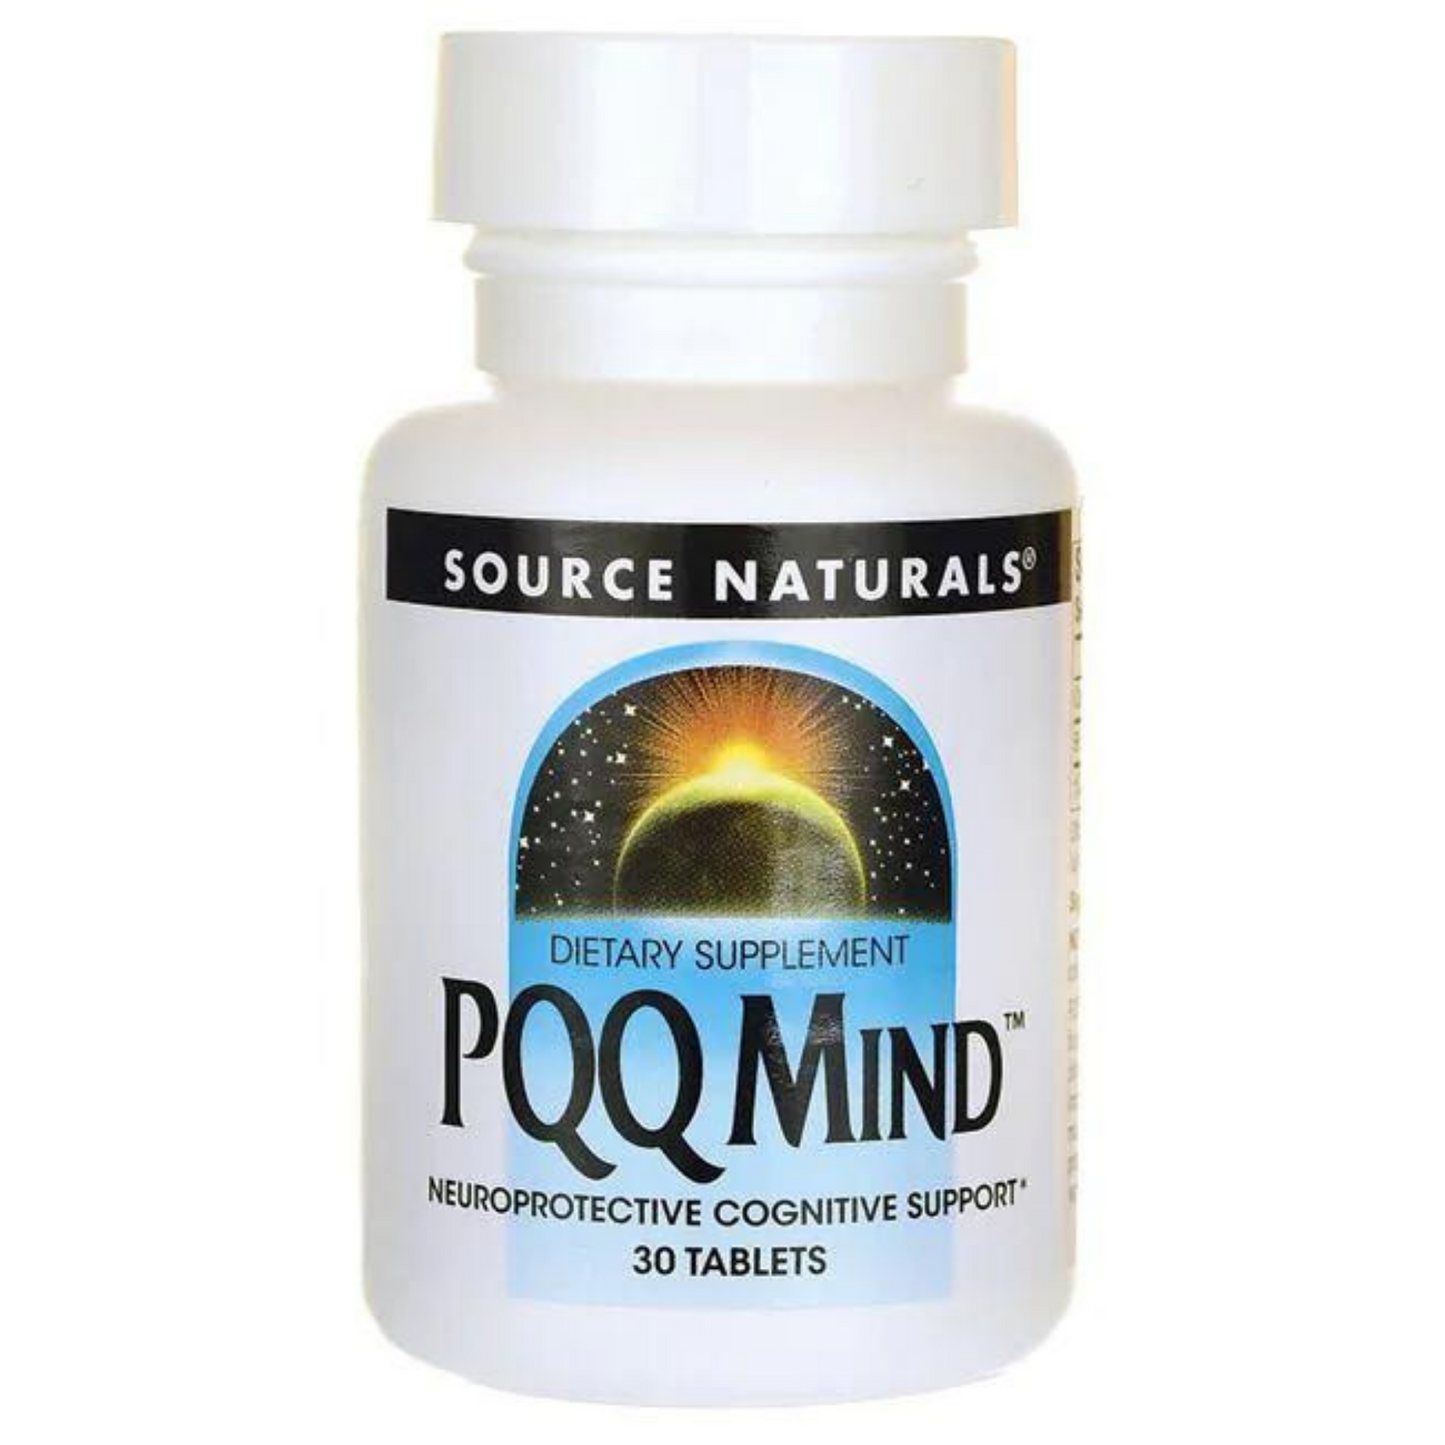 Primary image of PQQ Mind Tablets